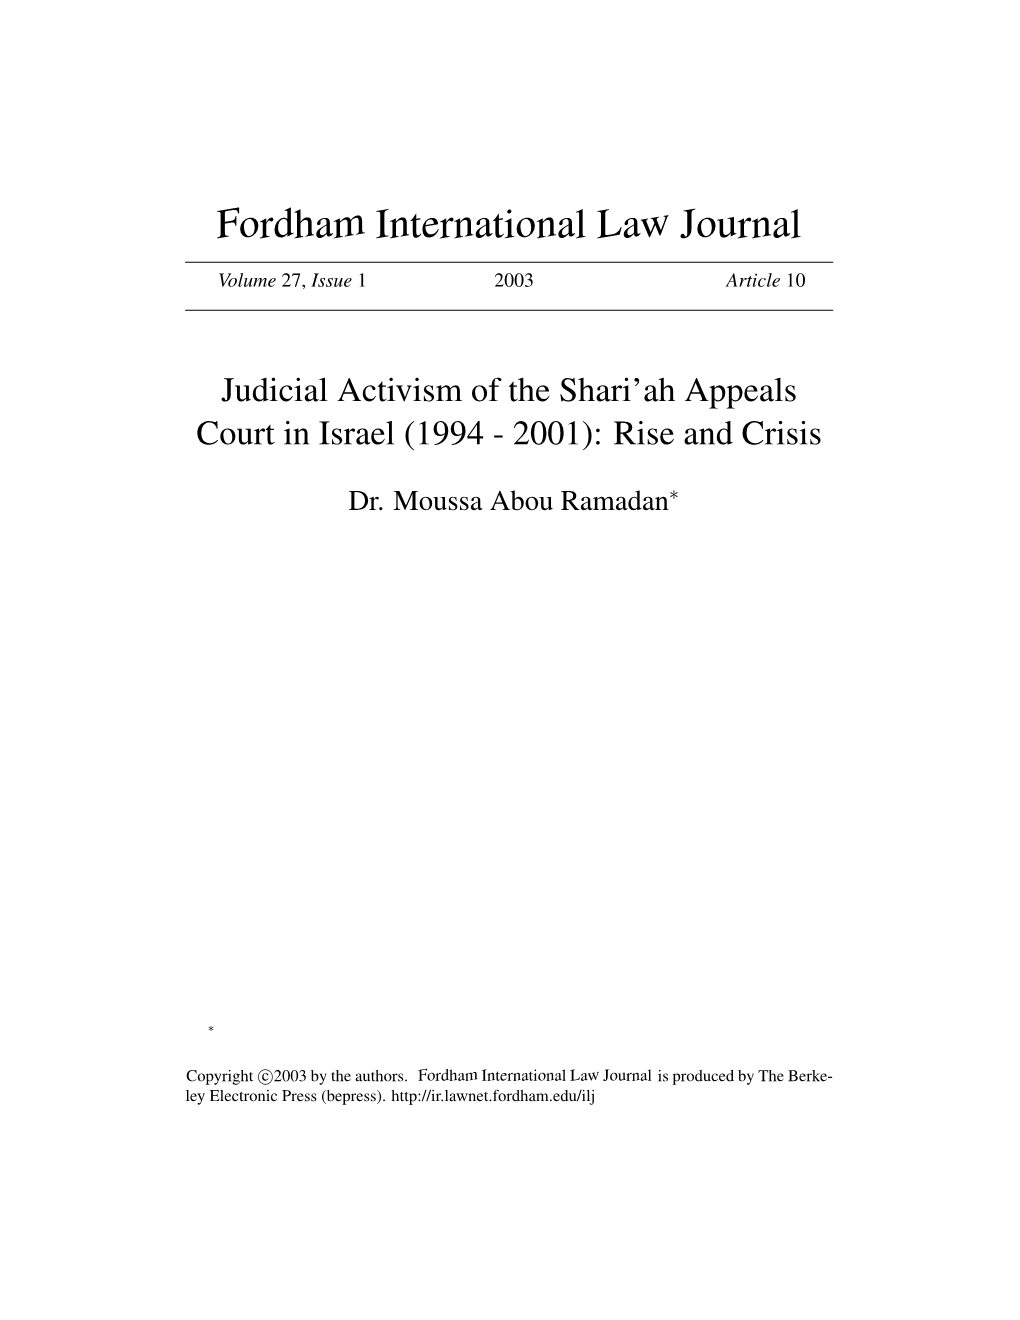 Judicial Activism of the Shari'ah Appeals Court in Israel (1994-2001): Rise and Crisis